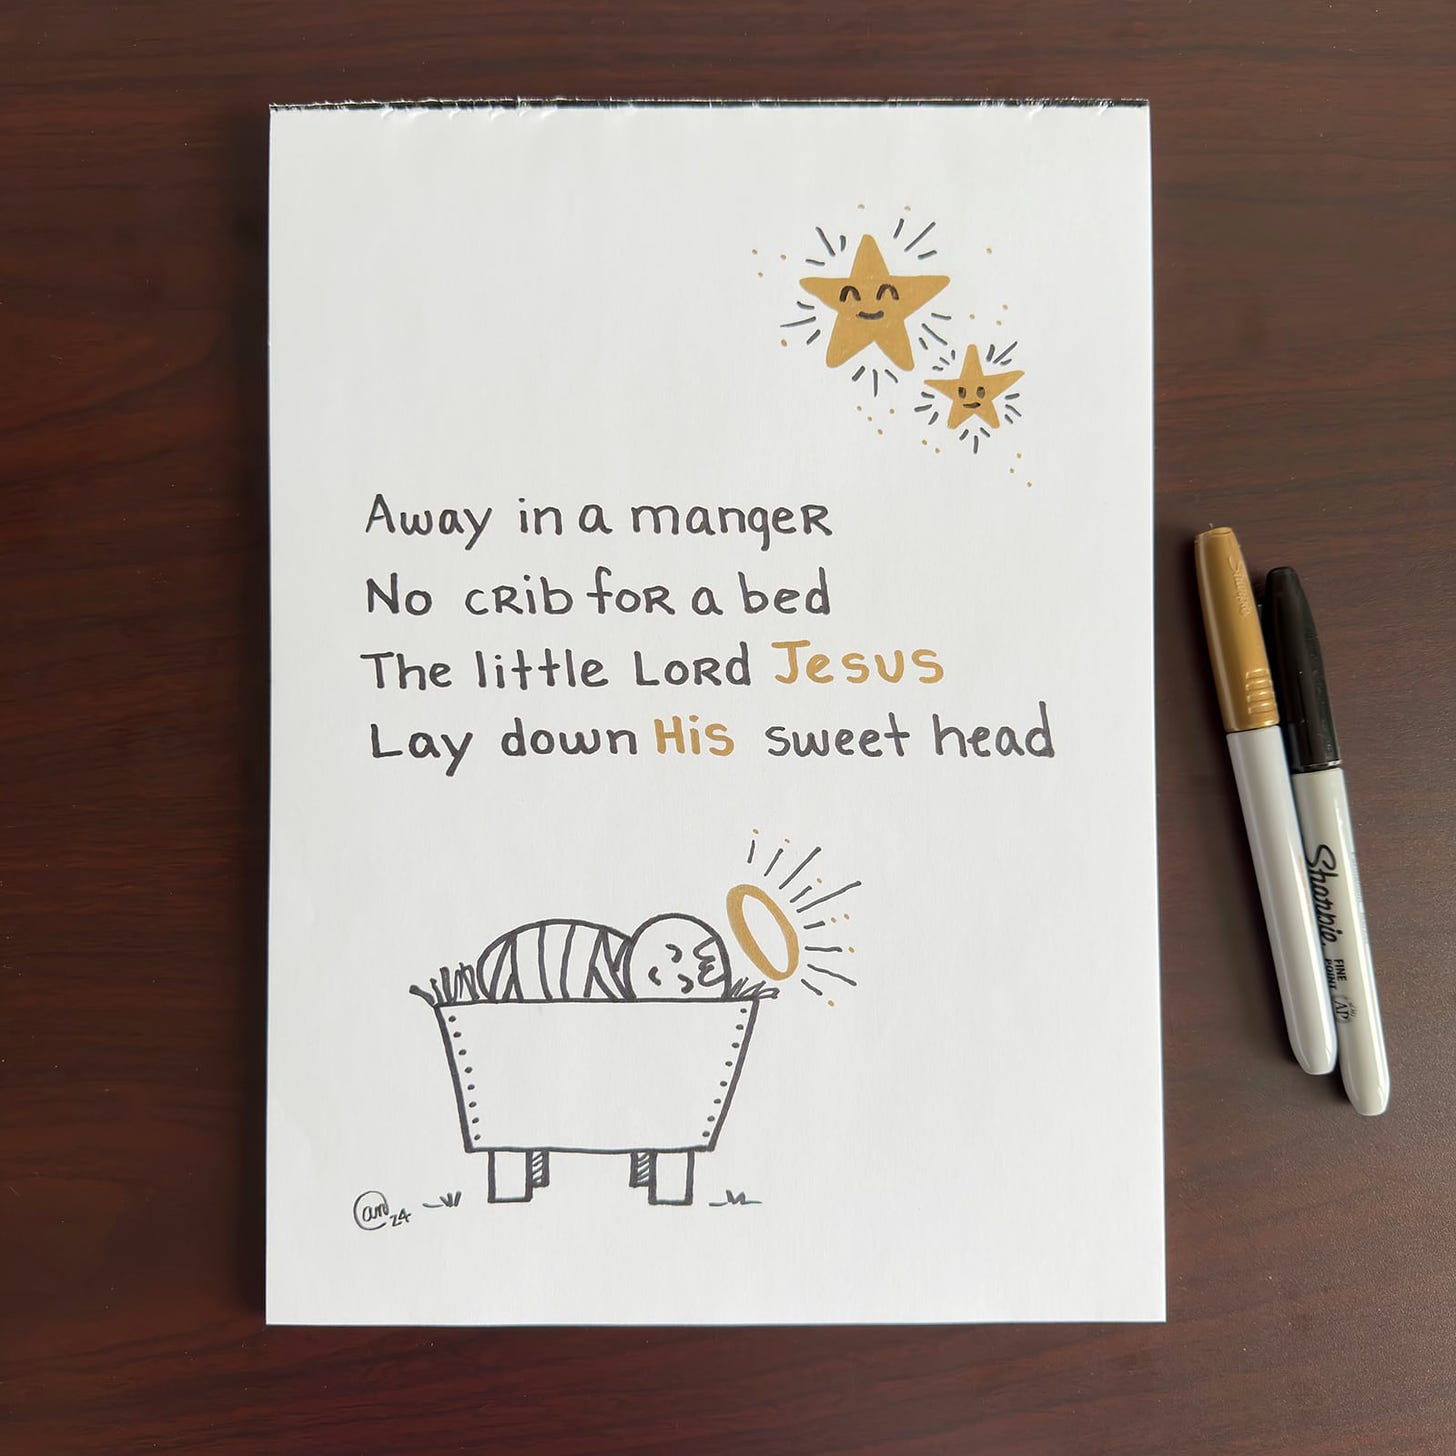 An illustration of lyrics from the song "Away in a Manger."